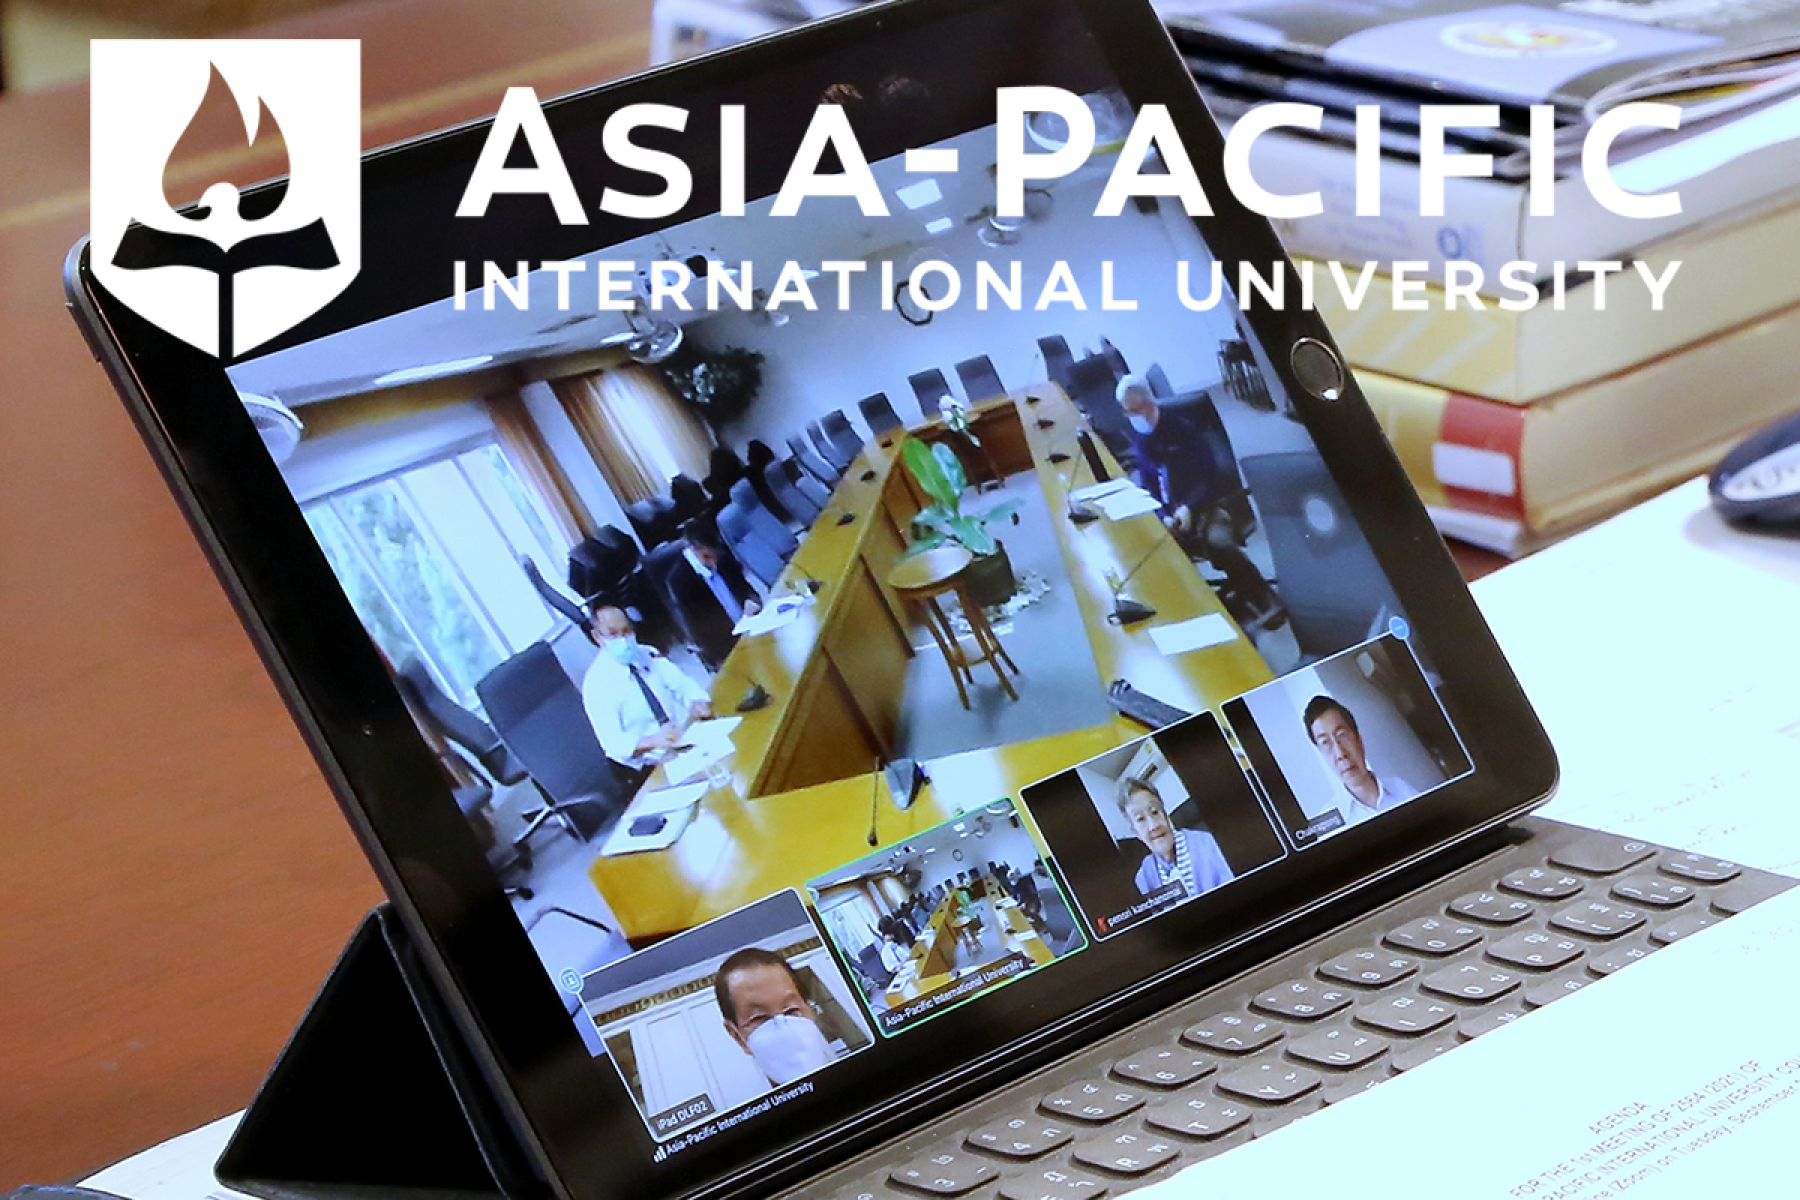 AU President Participated in The Asia - Pacific International University Council Meeting 2021